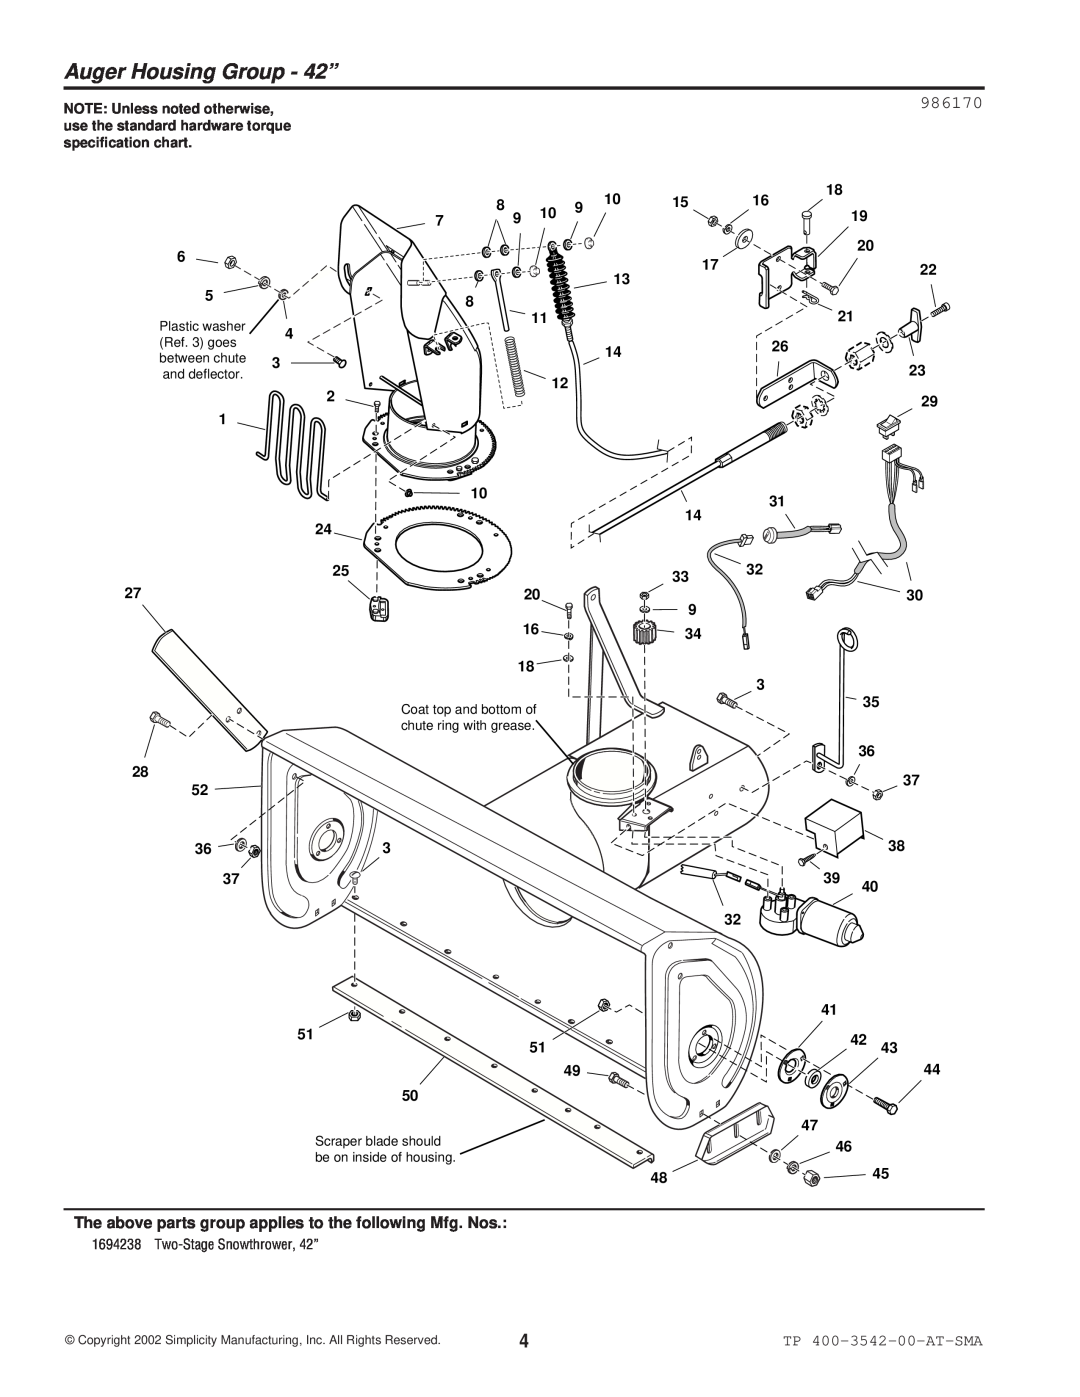 Simplicity 1694238 manual Auger Housing Group - 42”, 986170, The above parts group applies to the following Mfg. Nos, 18xx 